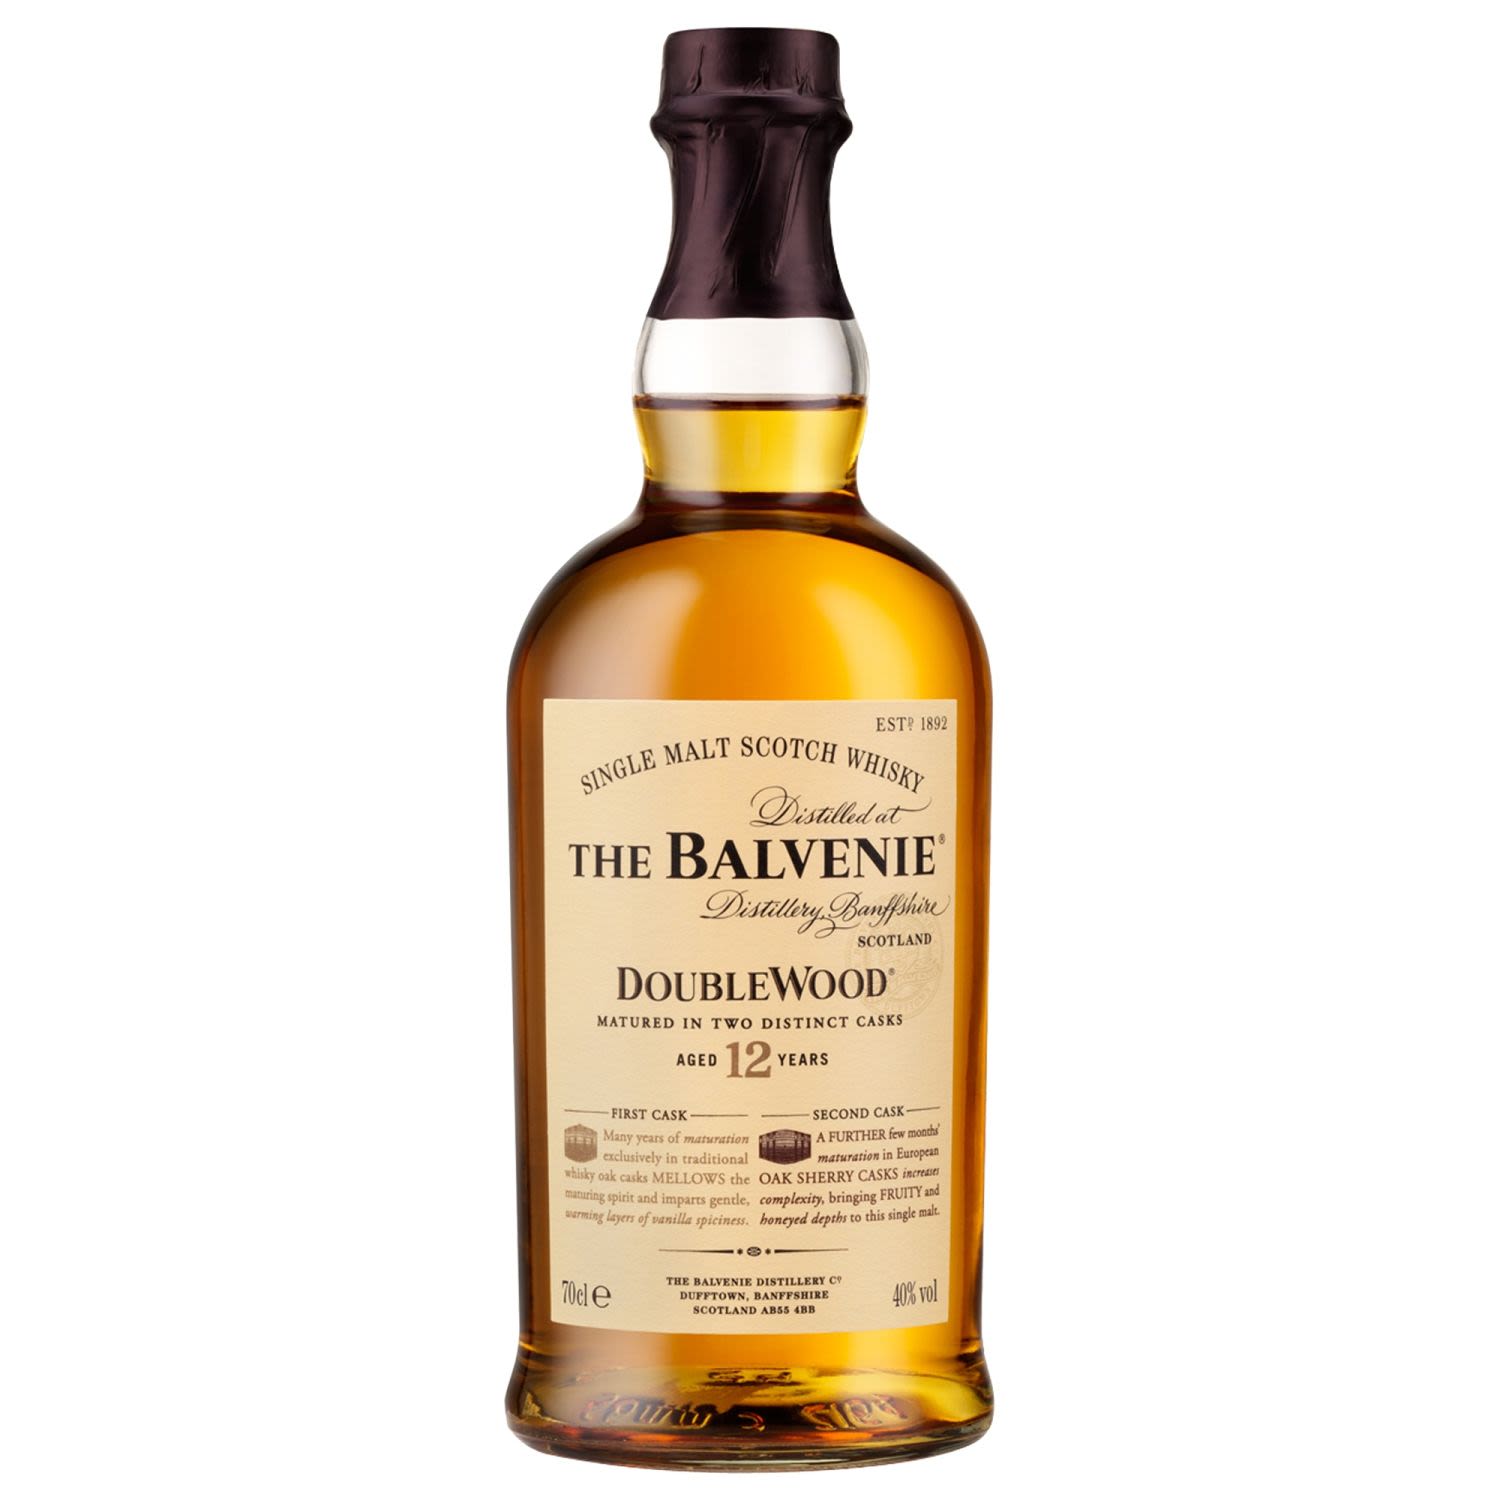 The Balvenie 12 Year Old DoubleWood Scotch Whisky 700mL Bottle